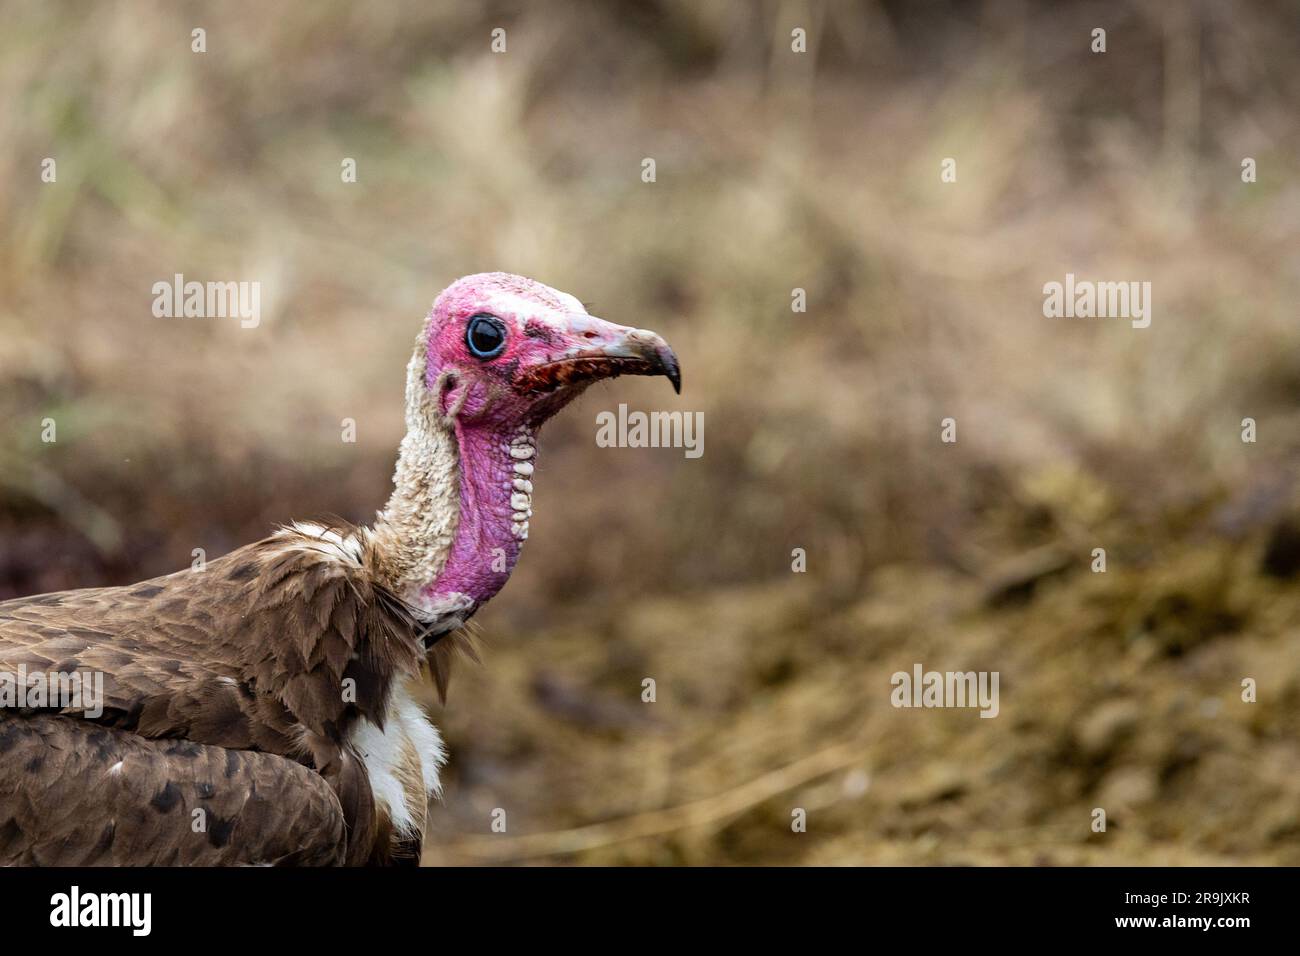 A hooded Vulture, Necrosyrtes monachus, close up, head and neck and a curved beak. Stock Photo